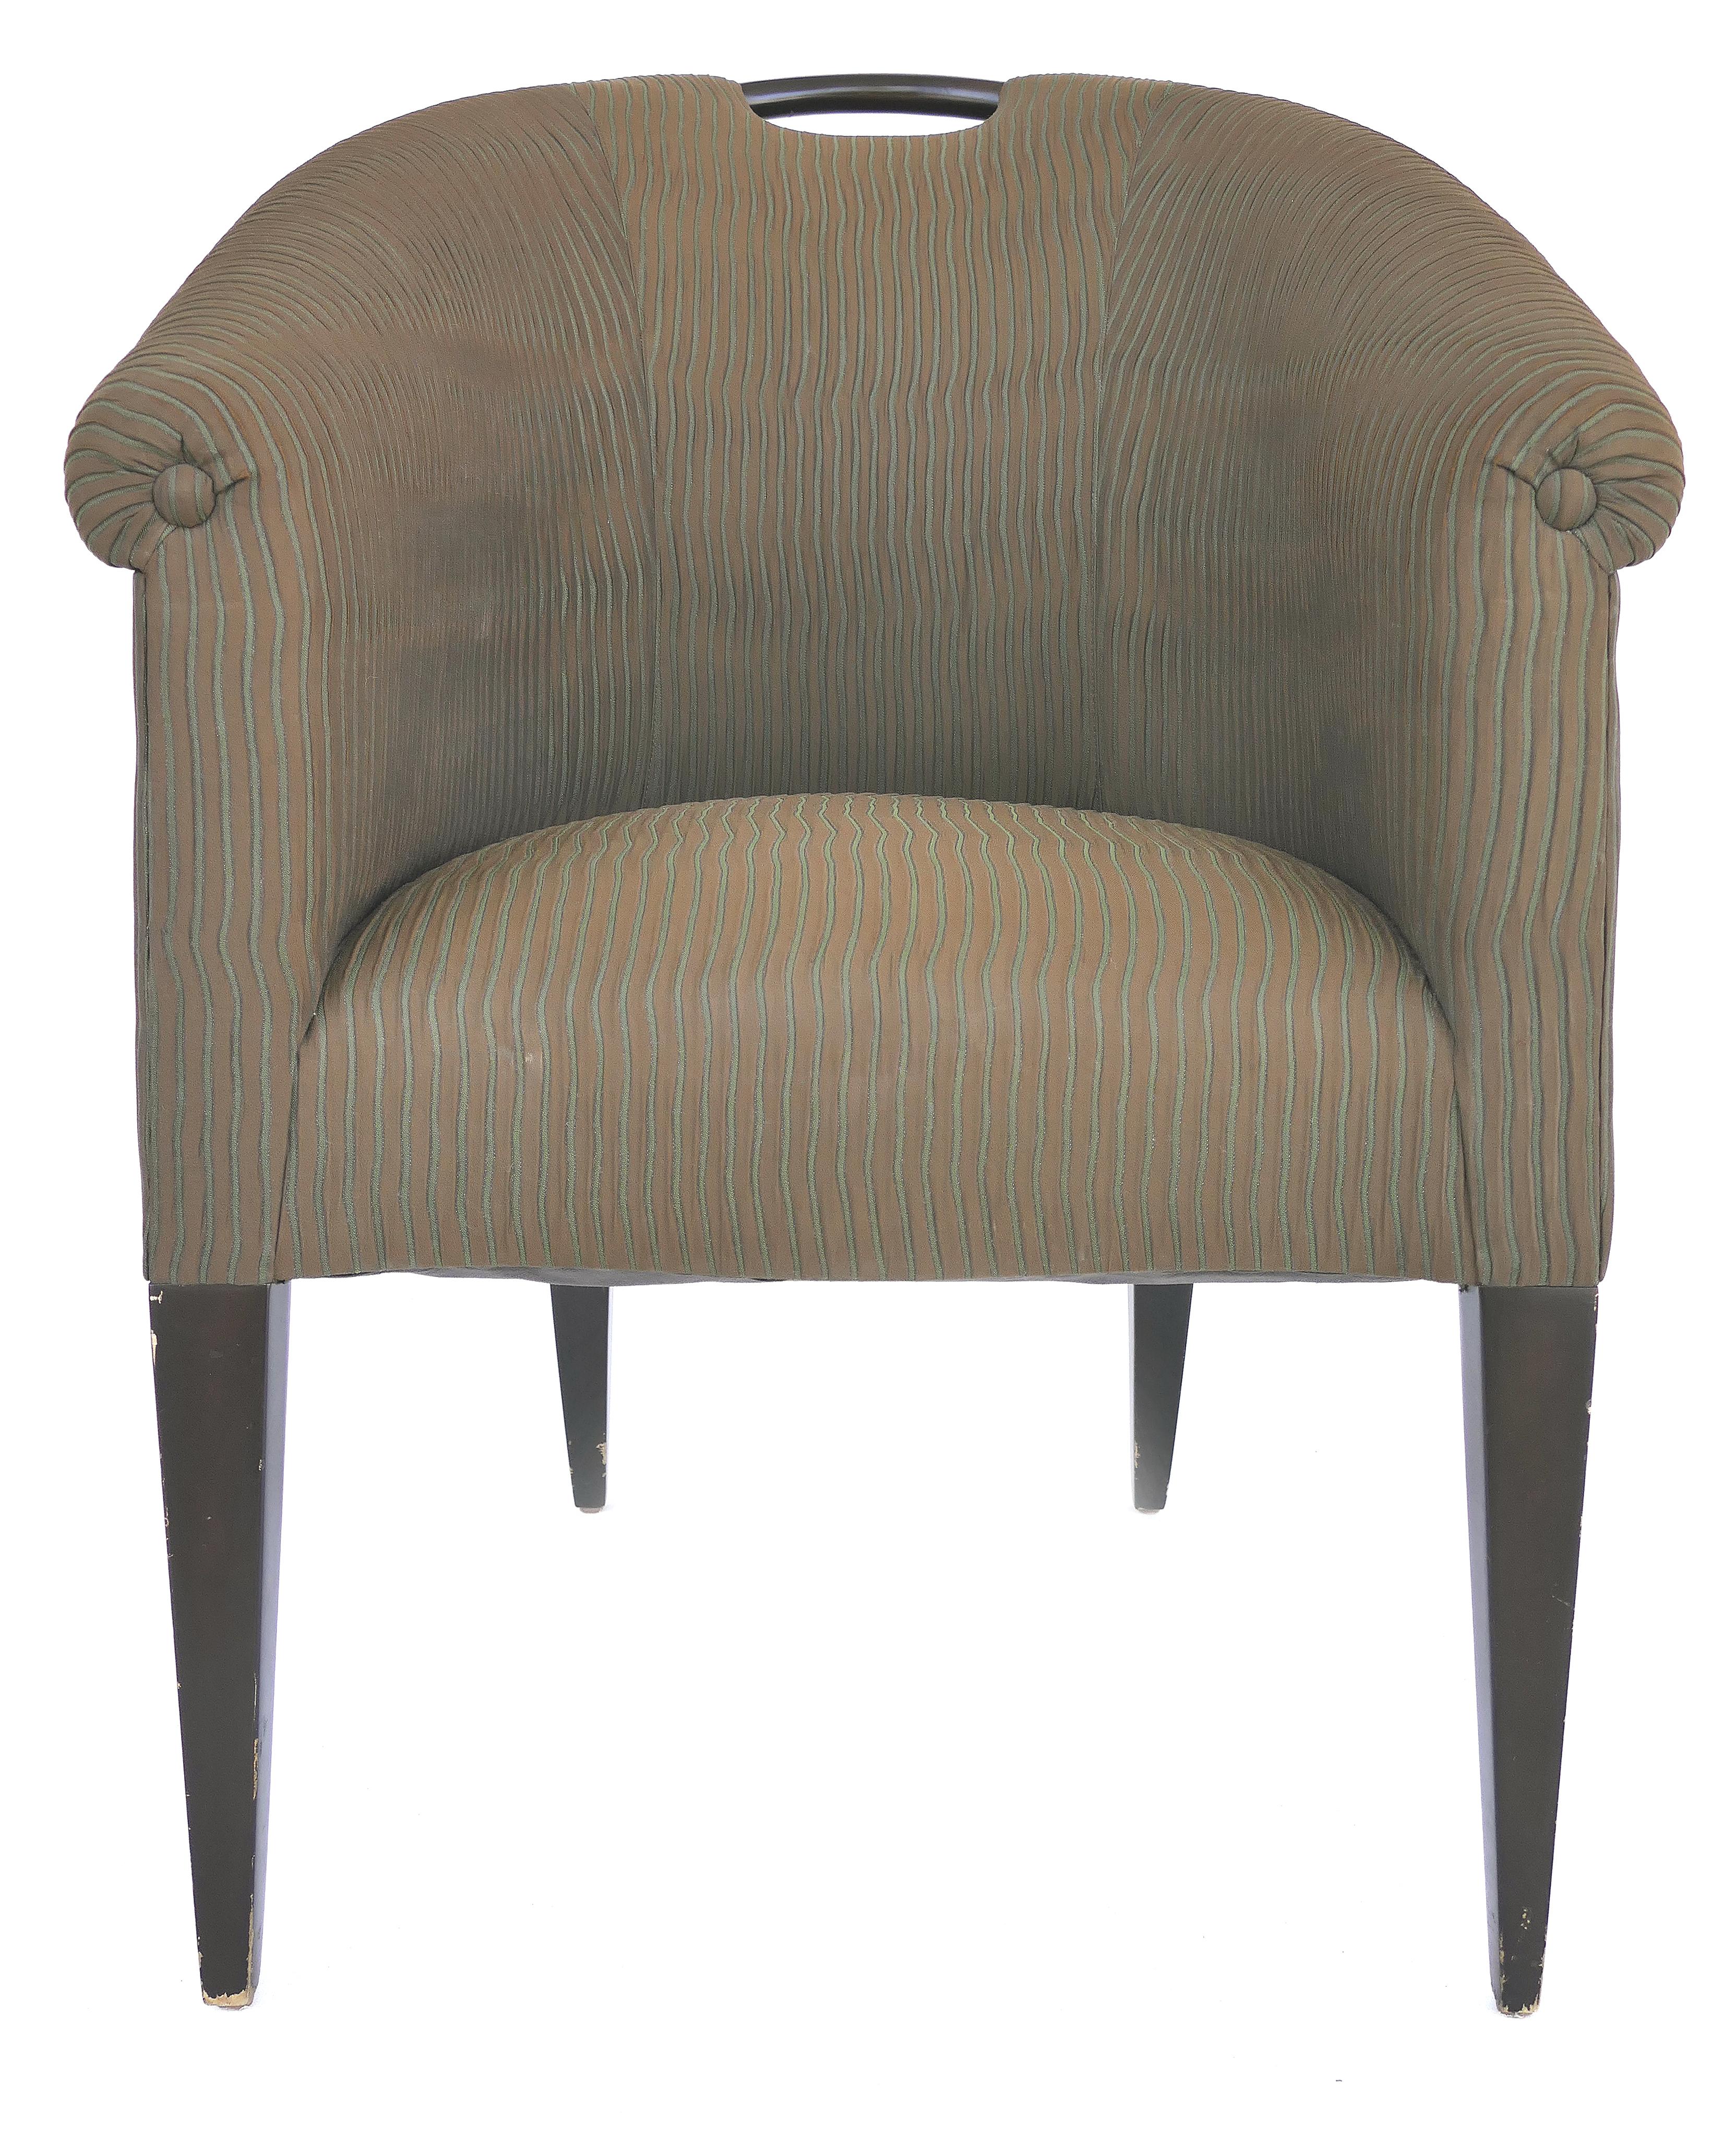 Donghia upholstered club chairs with wood handles

Offered for sale is a pair of upholstered club chairs by Donghia with a wooden handle at the top and sides that slant down to the arms. The chairs are supported by slender tapered legs. The chairs